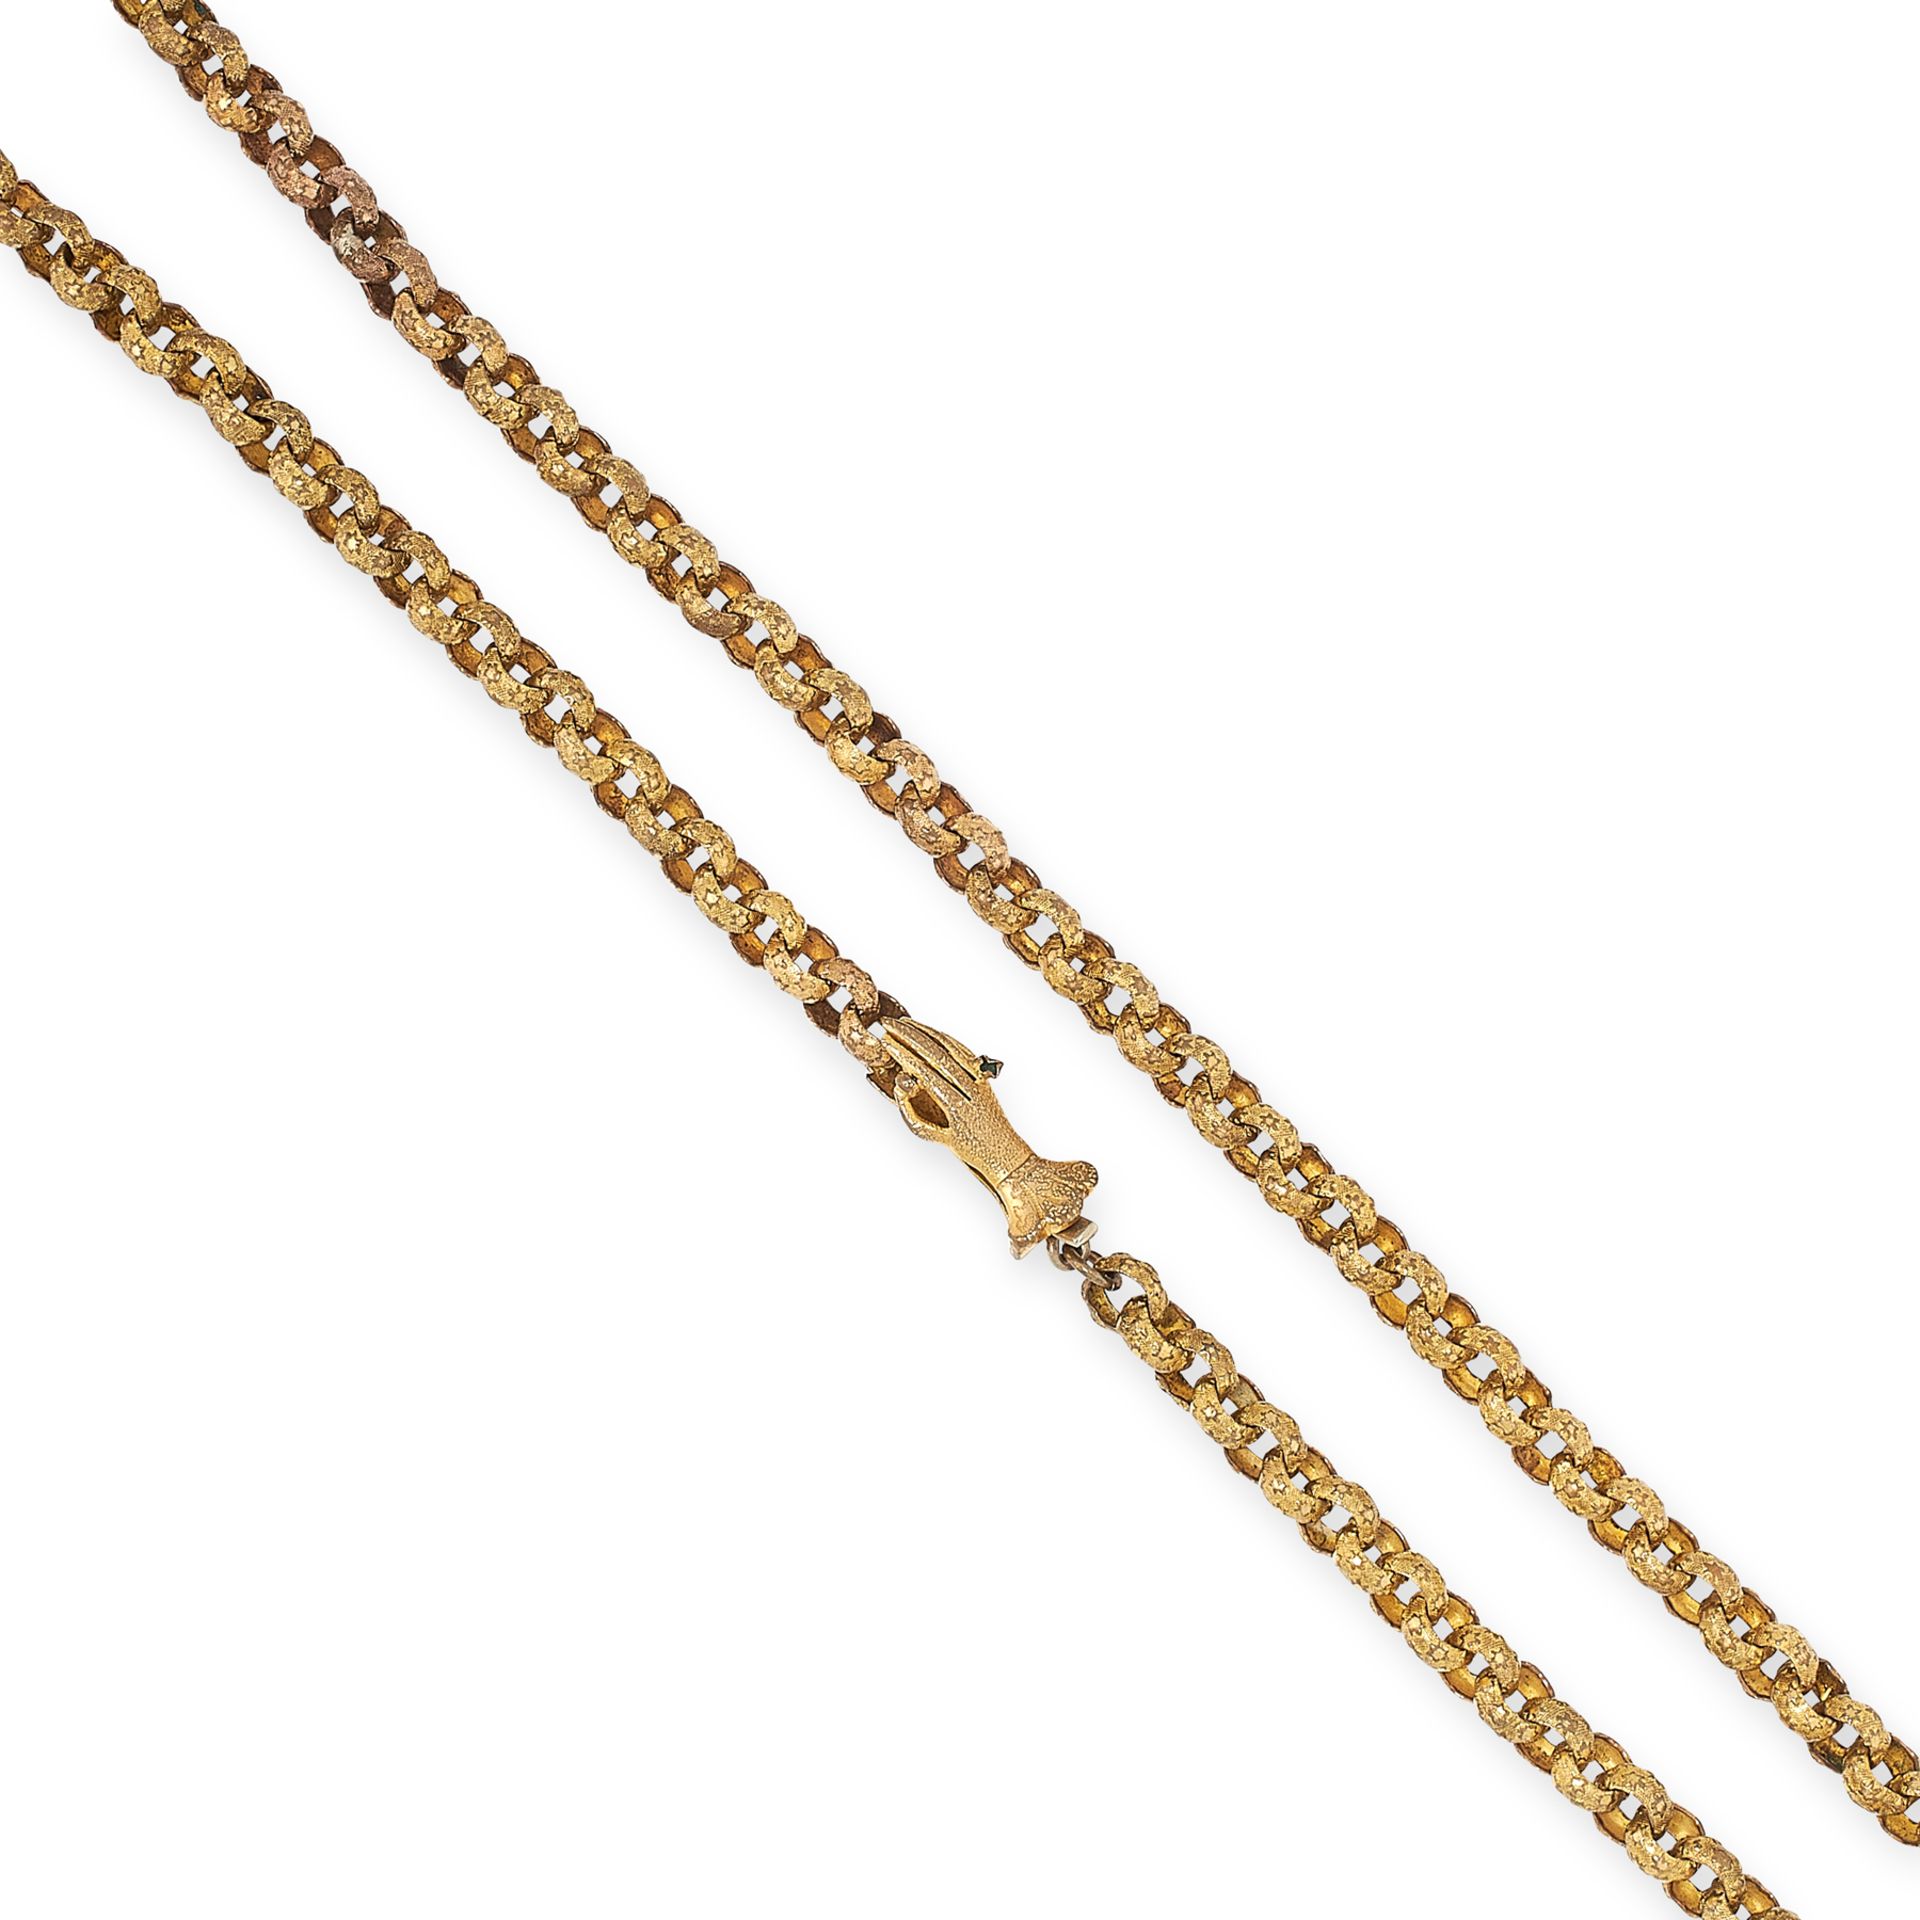 AN ANTIQUE GEORGIAN FANCY LINK CHAIN NECKLACE, 19TH CENTURY designed as a single row of